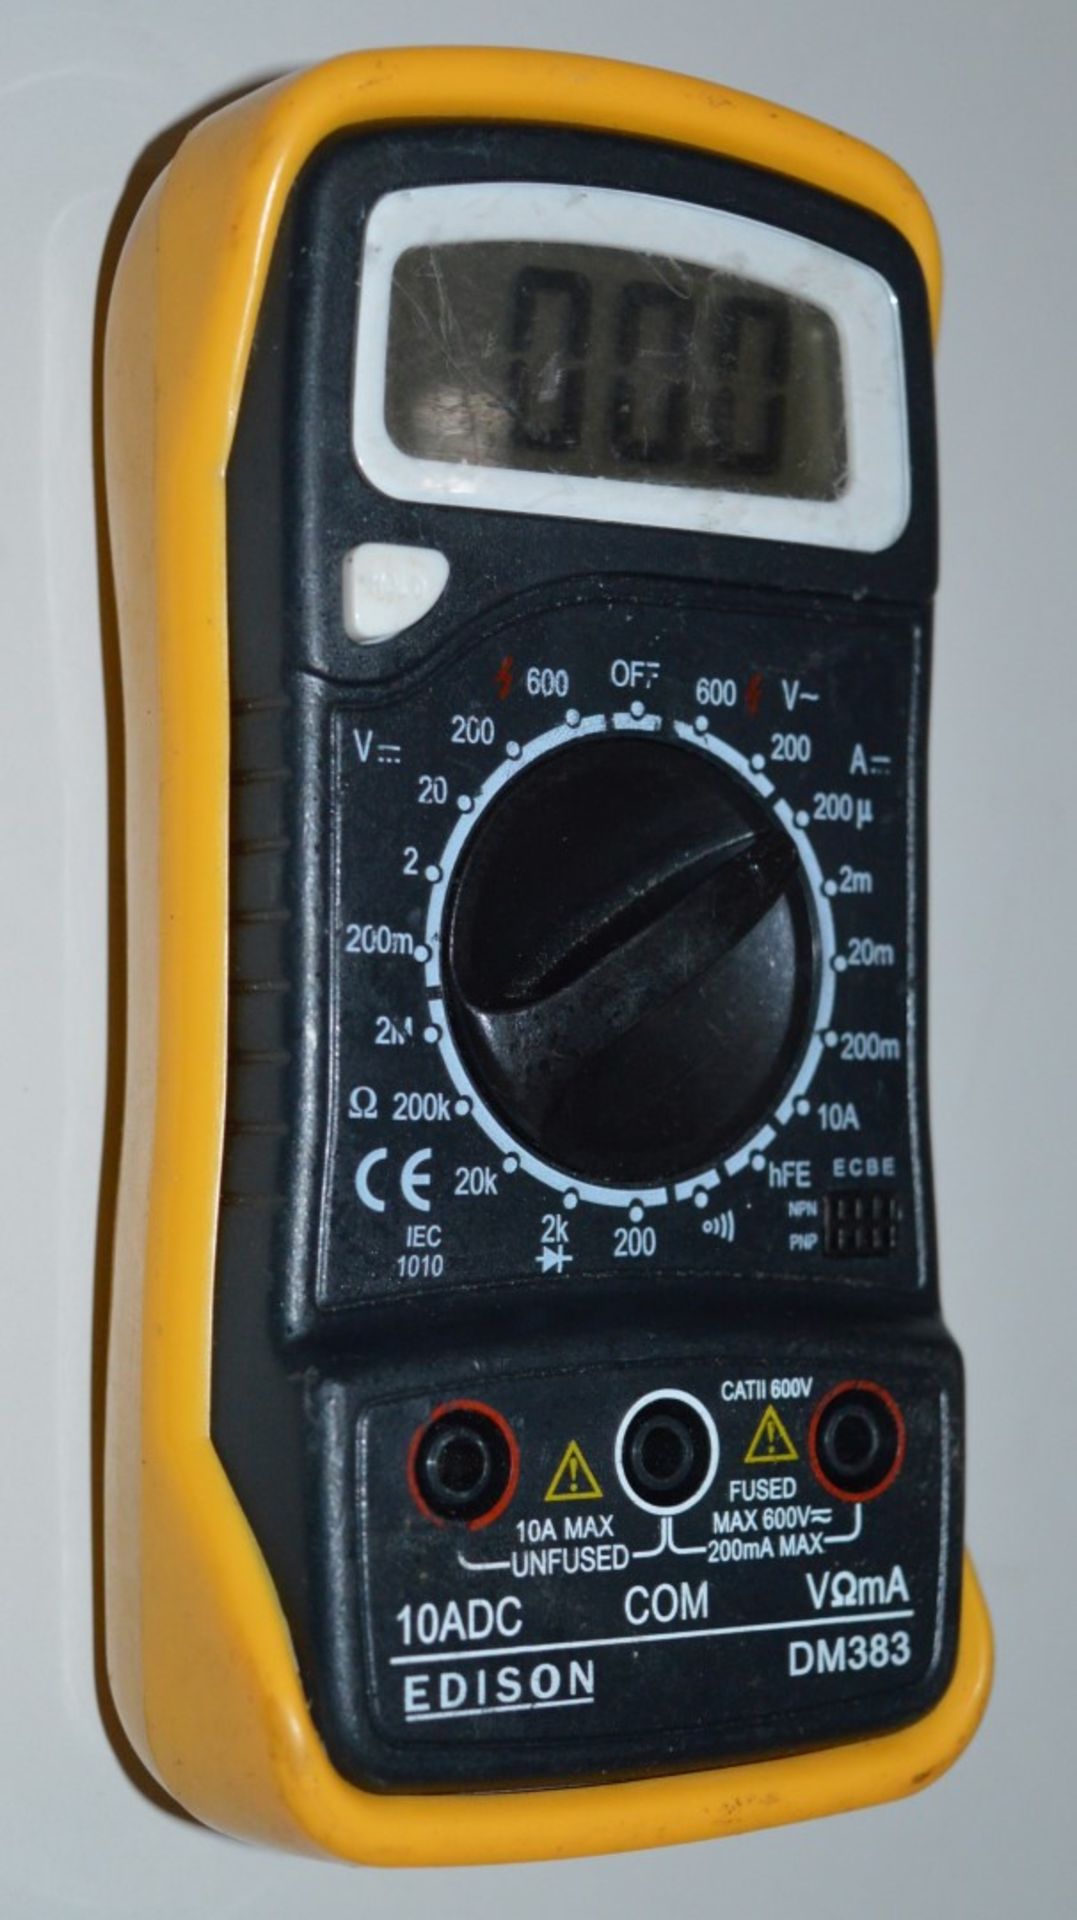 1 x Edison DM383 10ADC Multimeter With Probes - CL300 - Ref PC253 - Location: Altrincham WA14 - Image 3 of 3